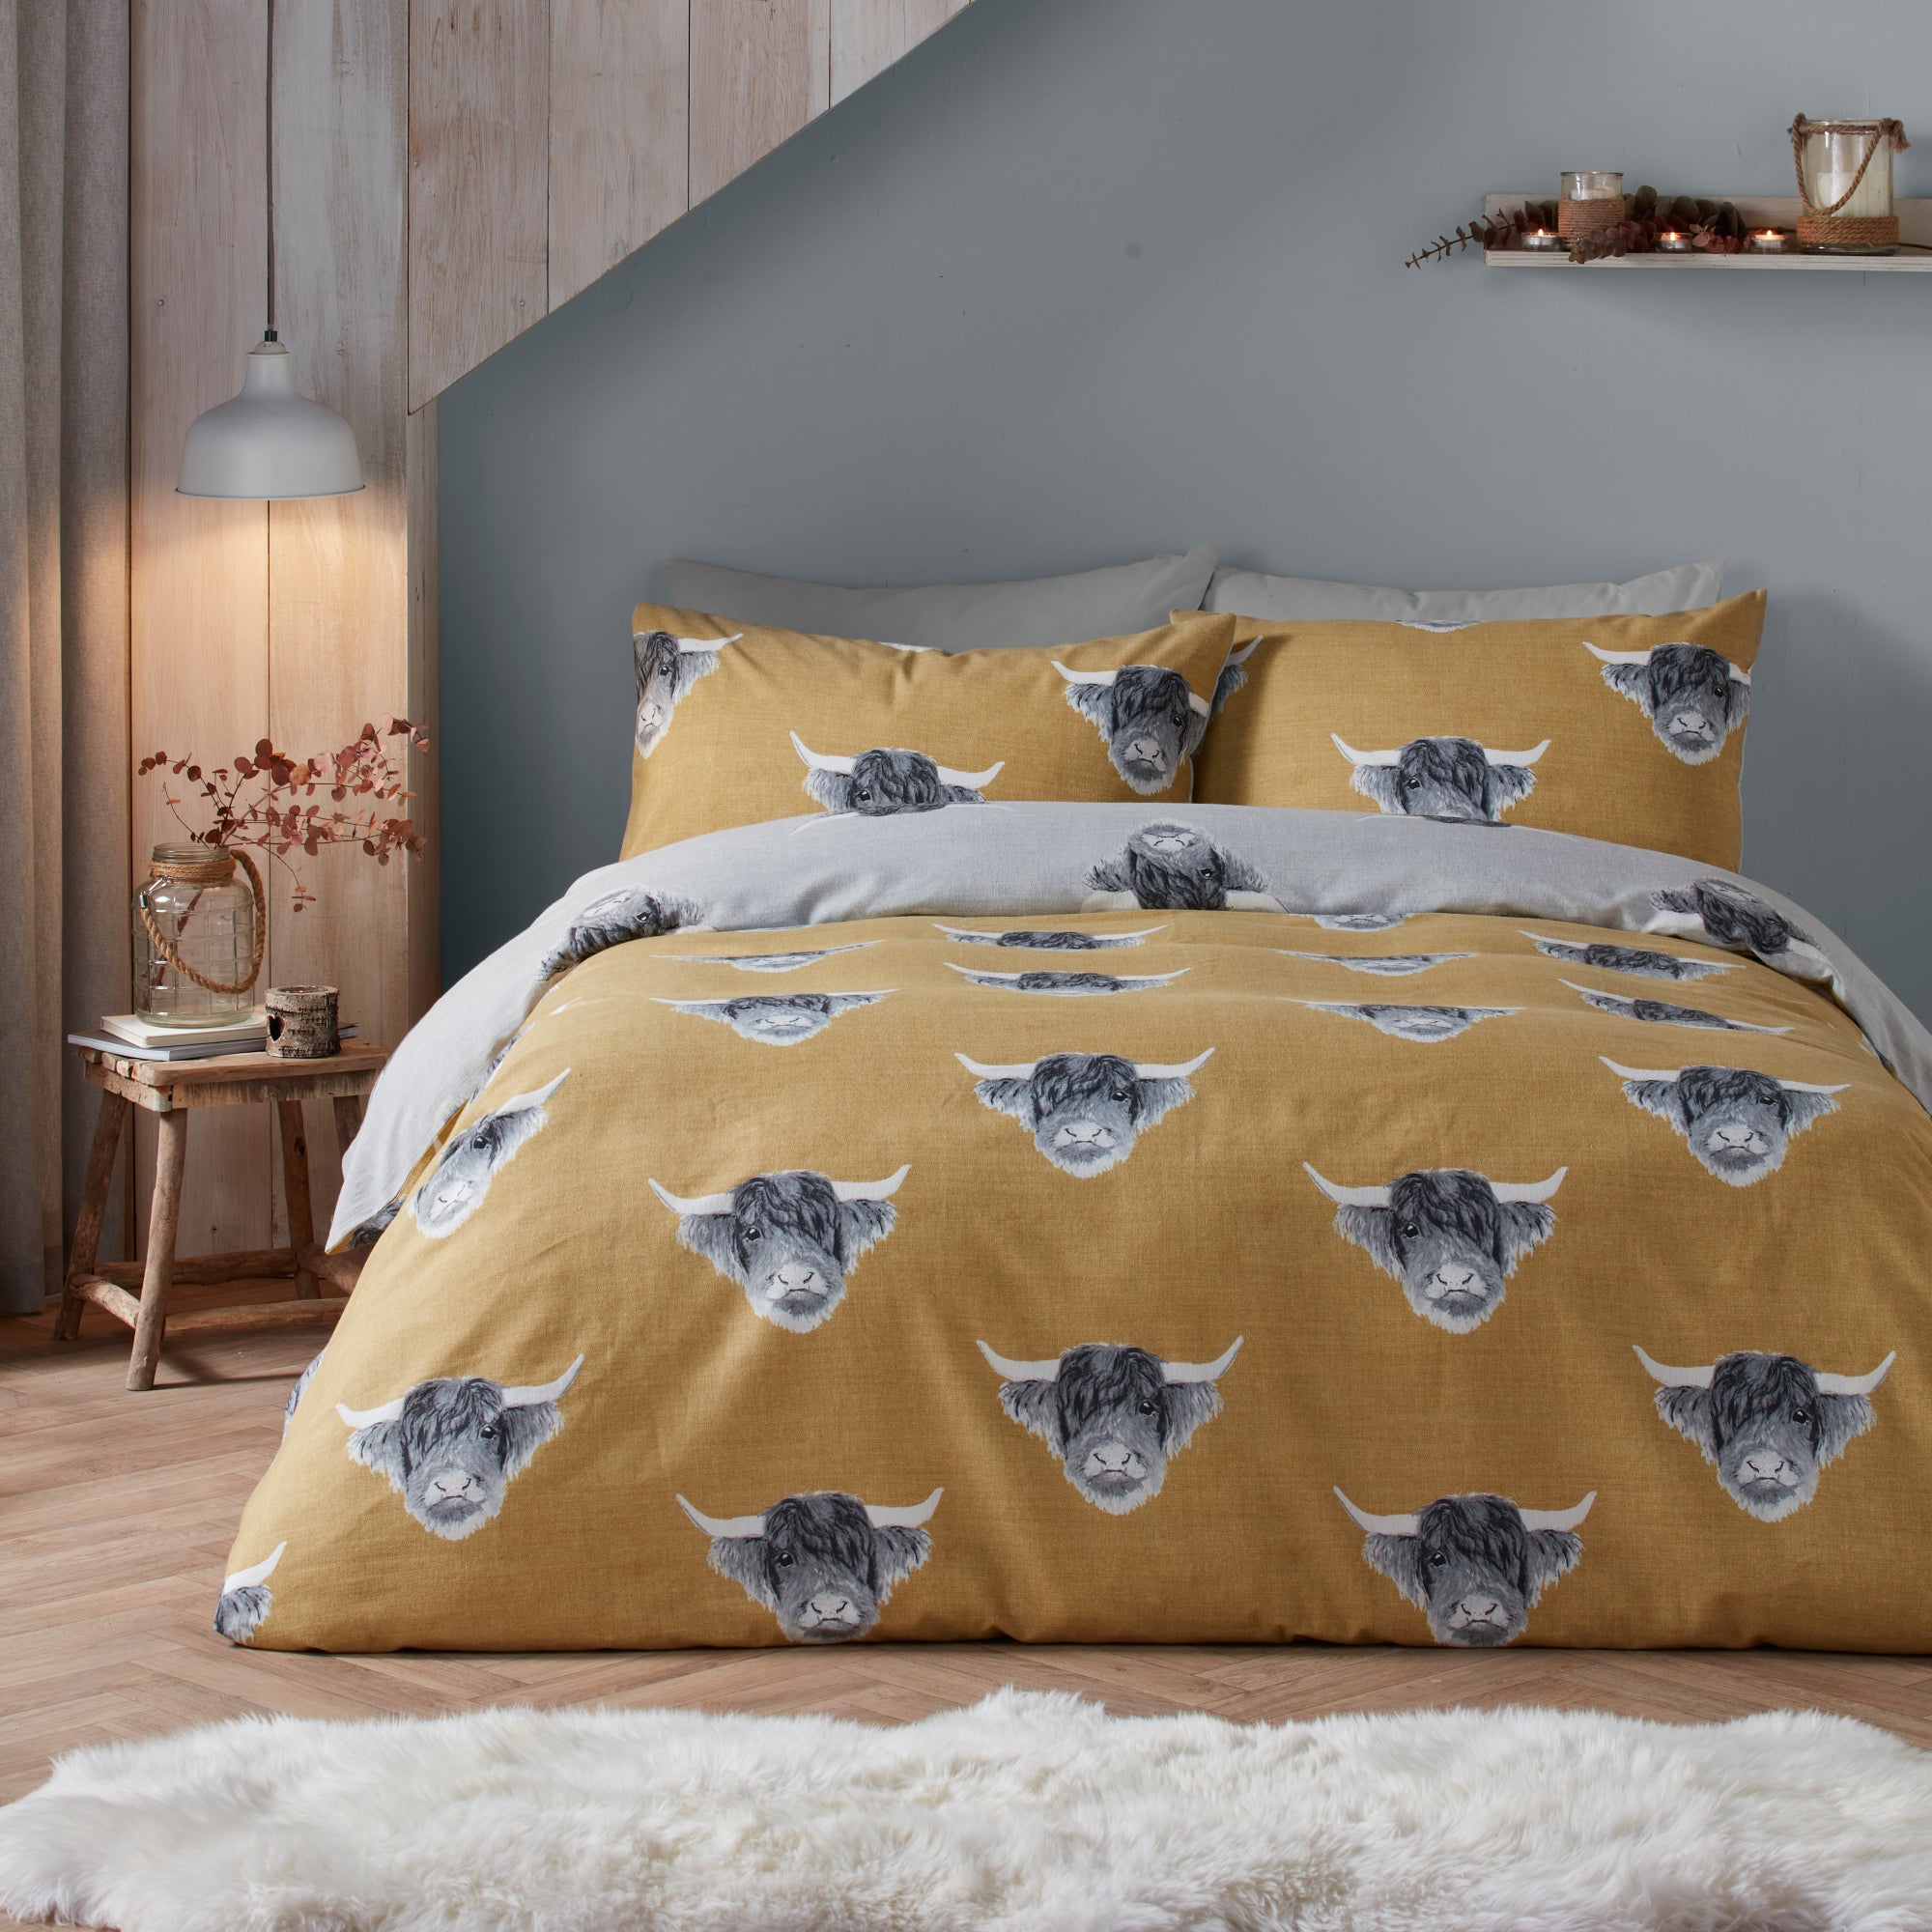 Duvet Cover Set Highland Cow by Fusion Snug in Ochre